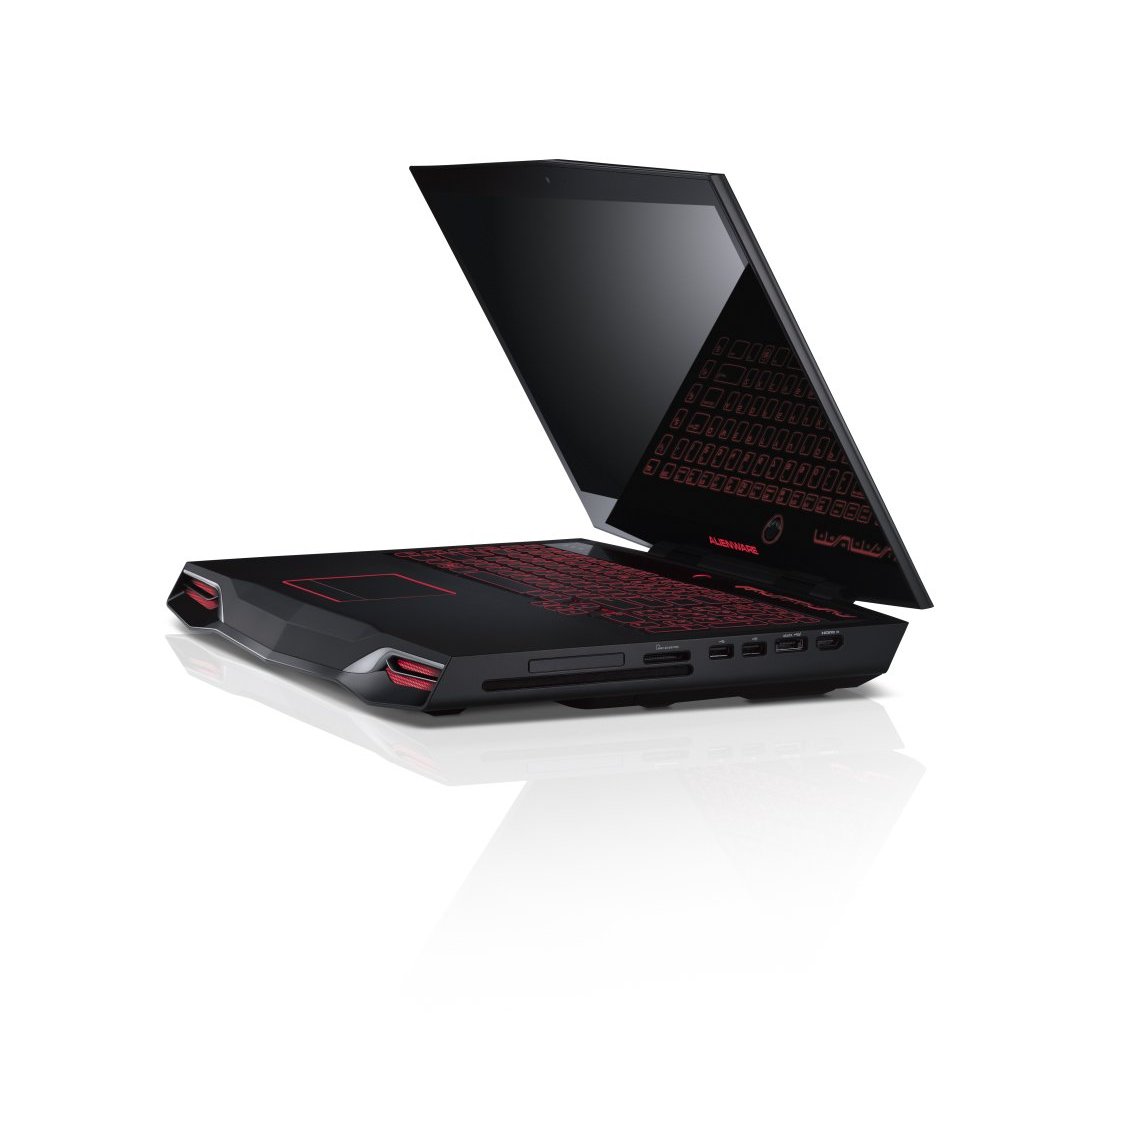 http://thetechjournal.com/wp-content/uploads/images/1206/1340513148-alienware-m17xr3-17inch-gaming-laptop-12.jpg